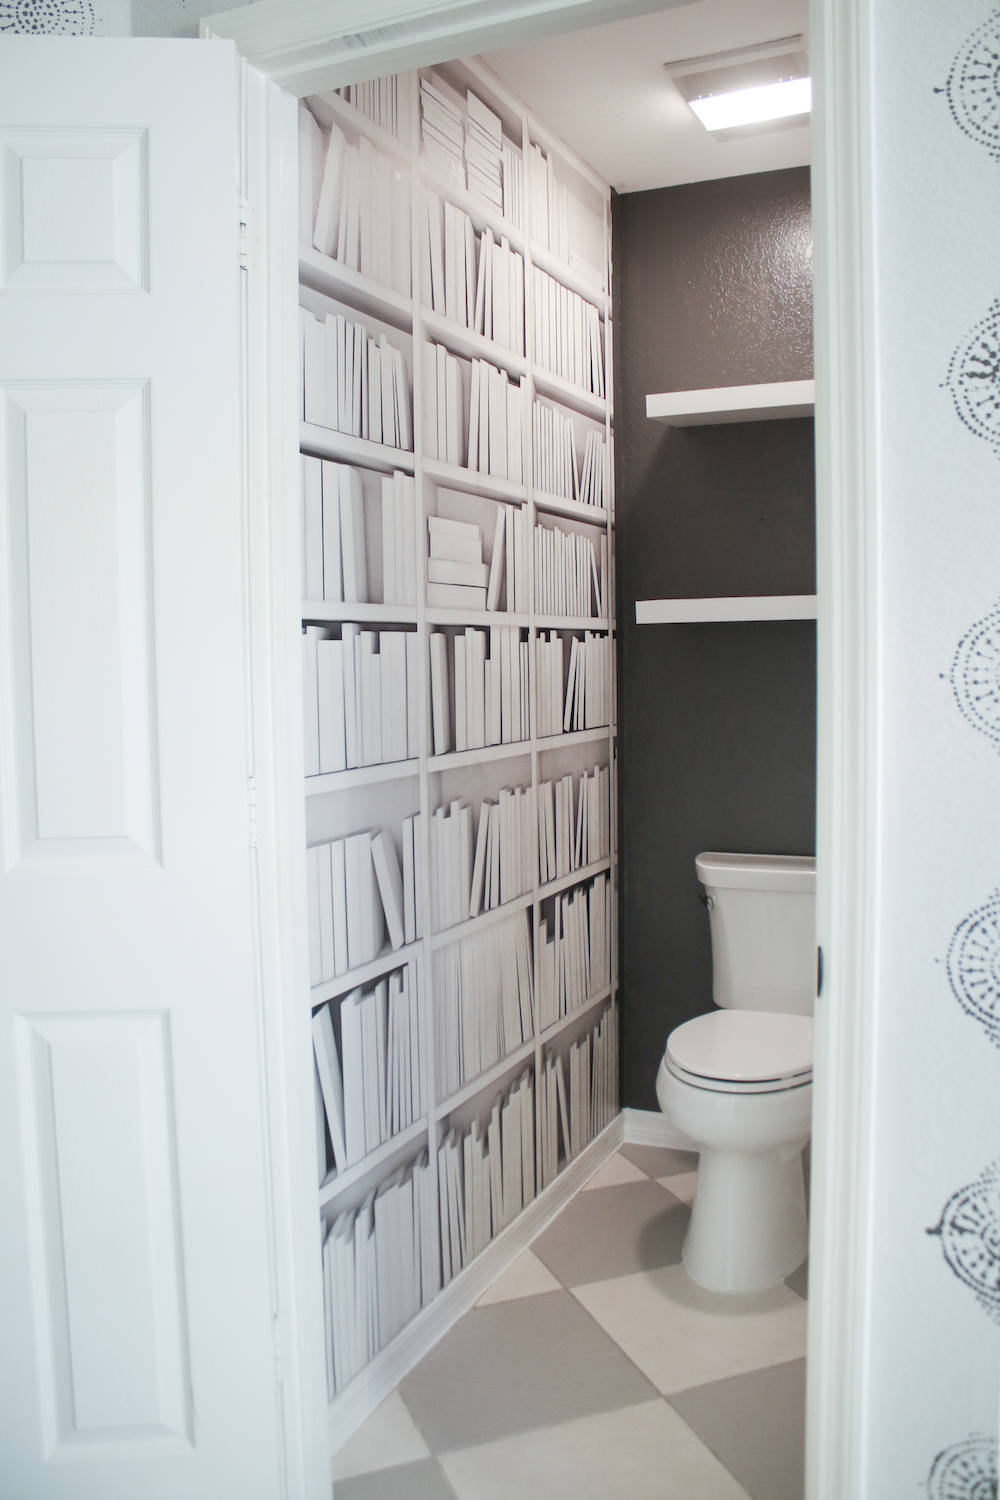 Stylishly designed monochromatic interior with a toilet and bookshelves Wallpaper